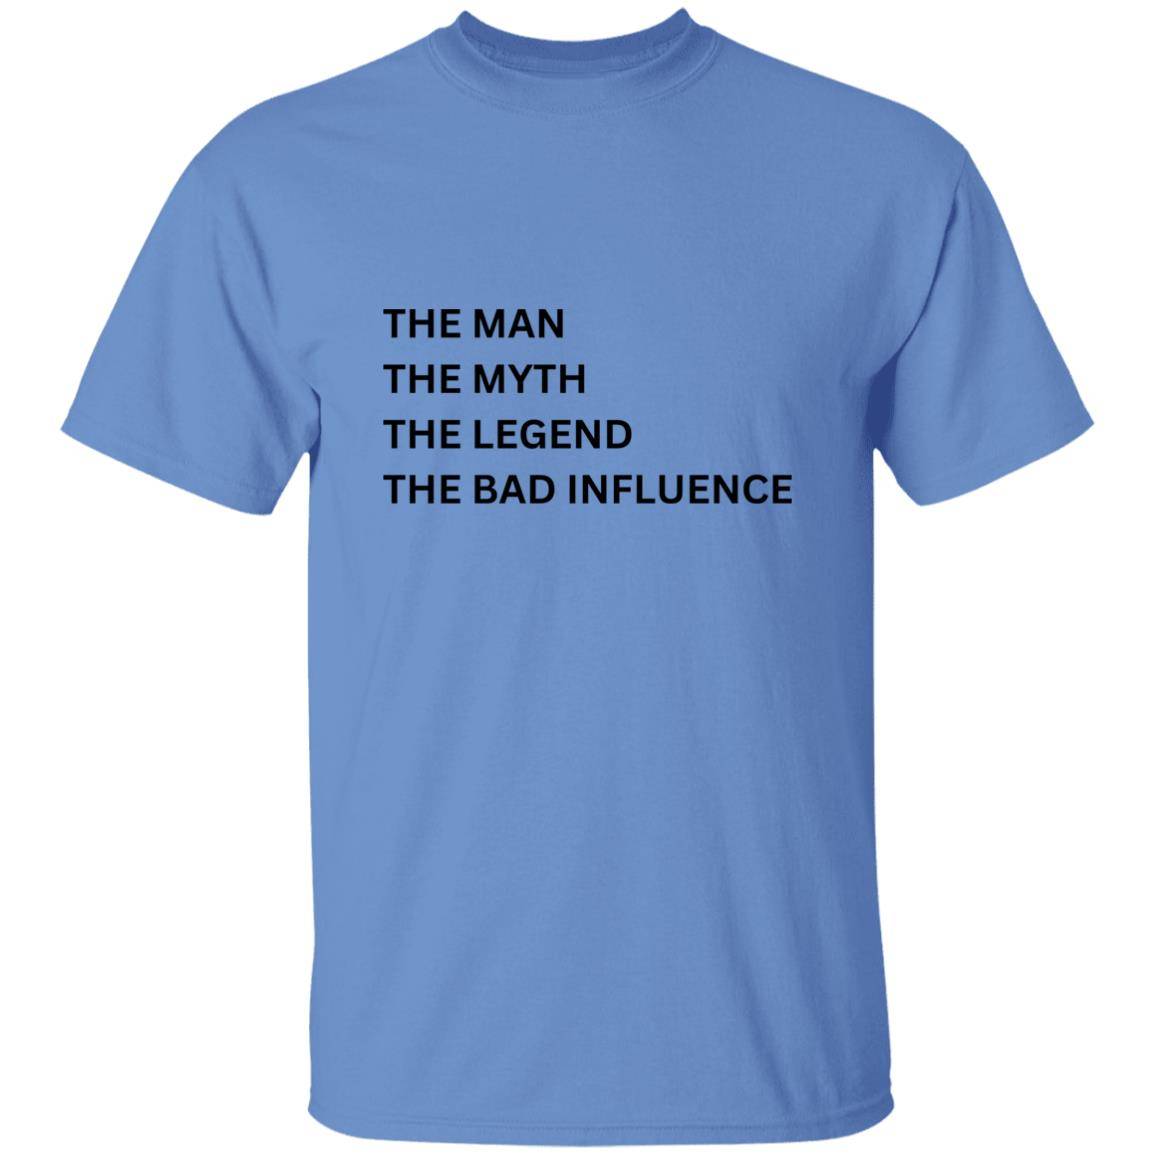 Front of the Carolina blue Man, Myth, Legend t-shirt. Material is heavyweight 100% cotton in a classic unisex t-shirt style. Printed in black letters on the chest in a list-style is the phrase: "THE MAN, THE MYTH, THE LEGEND, THE BAD INFLUENCE"